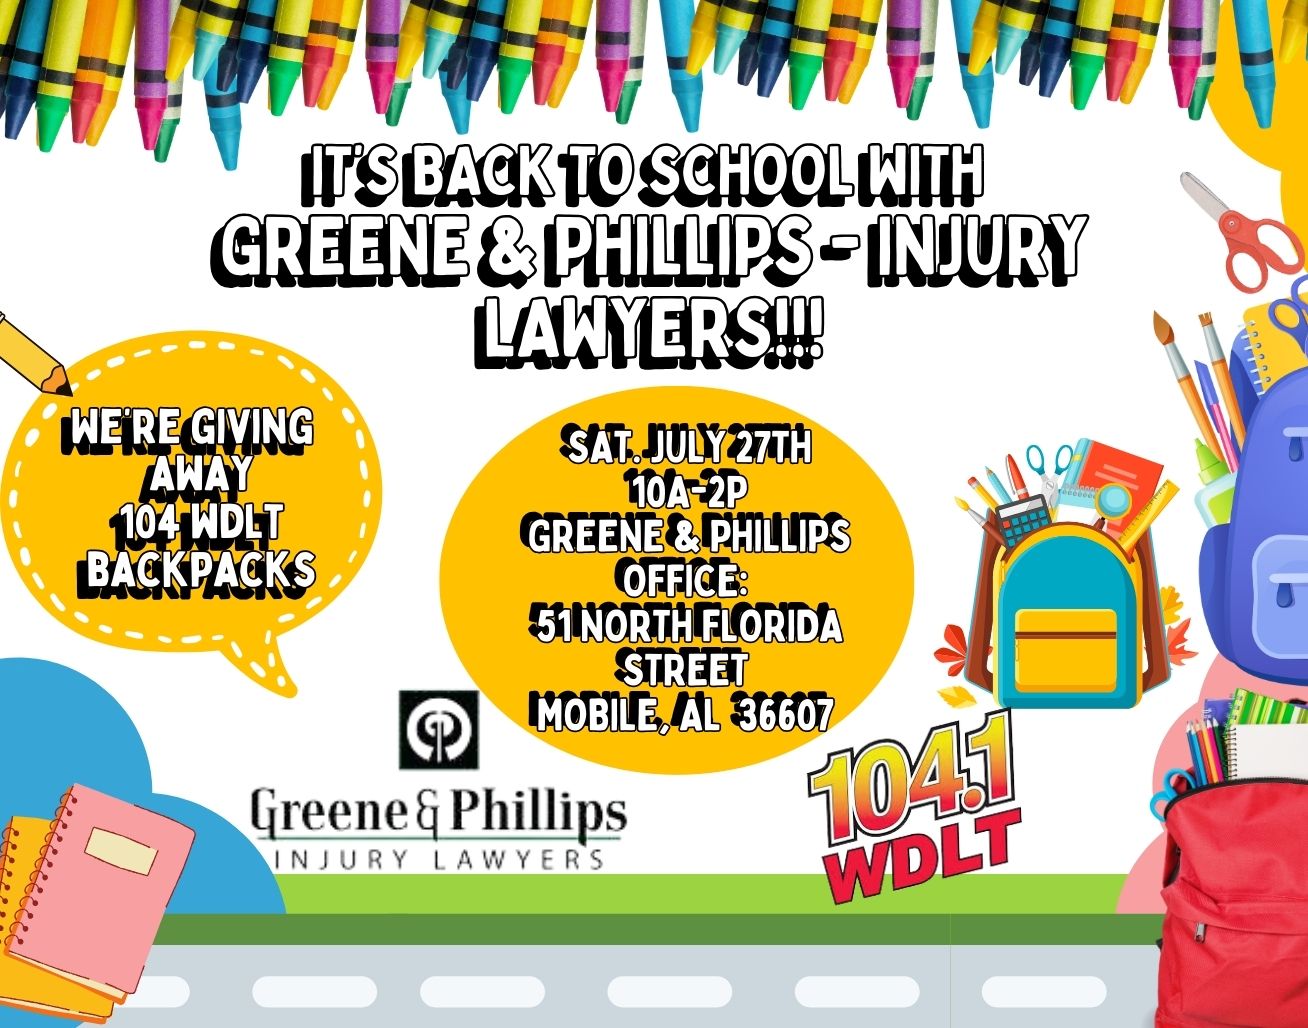 BACK TO SCHOOL WITH GREENE & PHILLIPS – INJURY LAWYERS